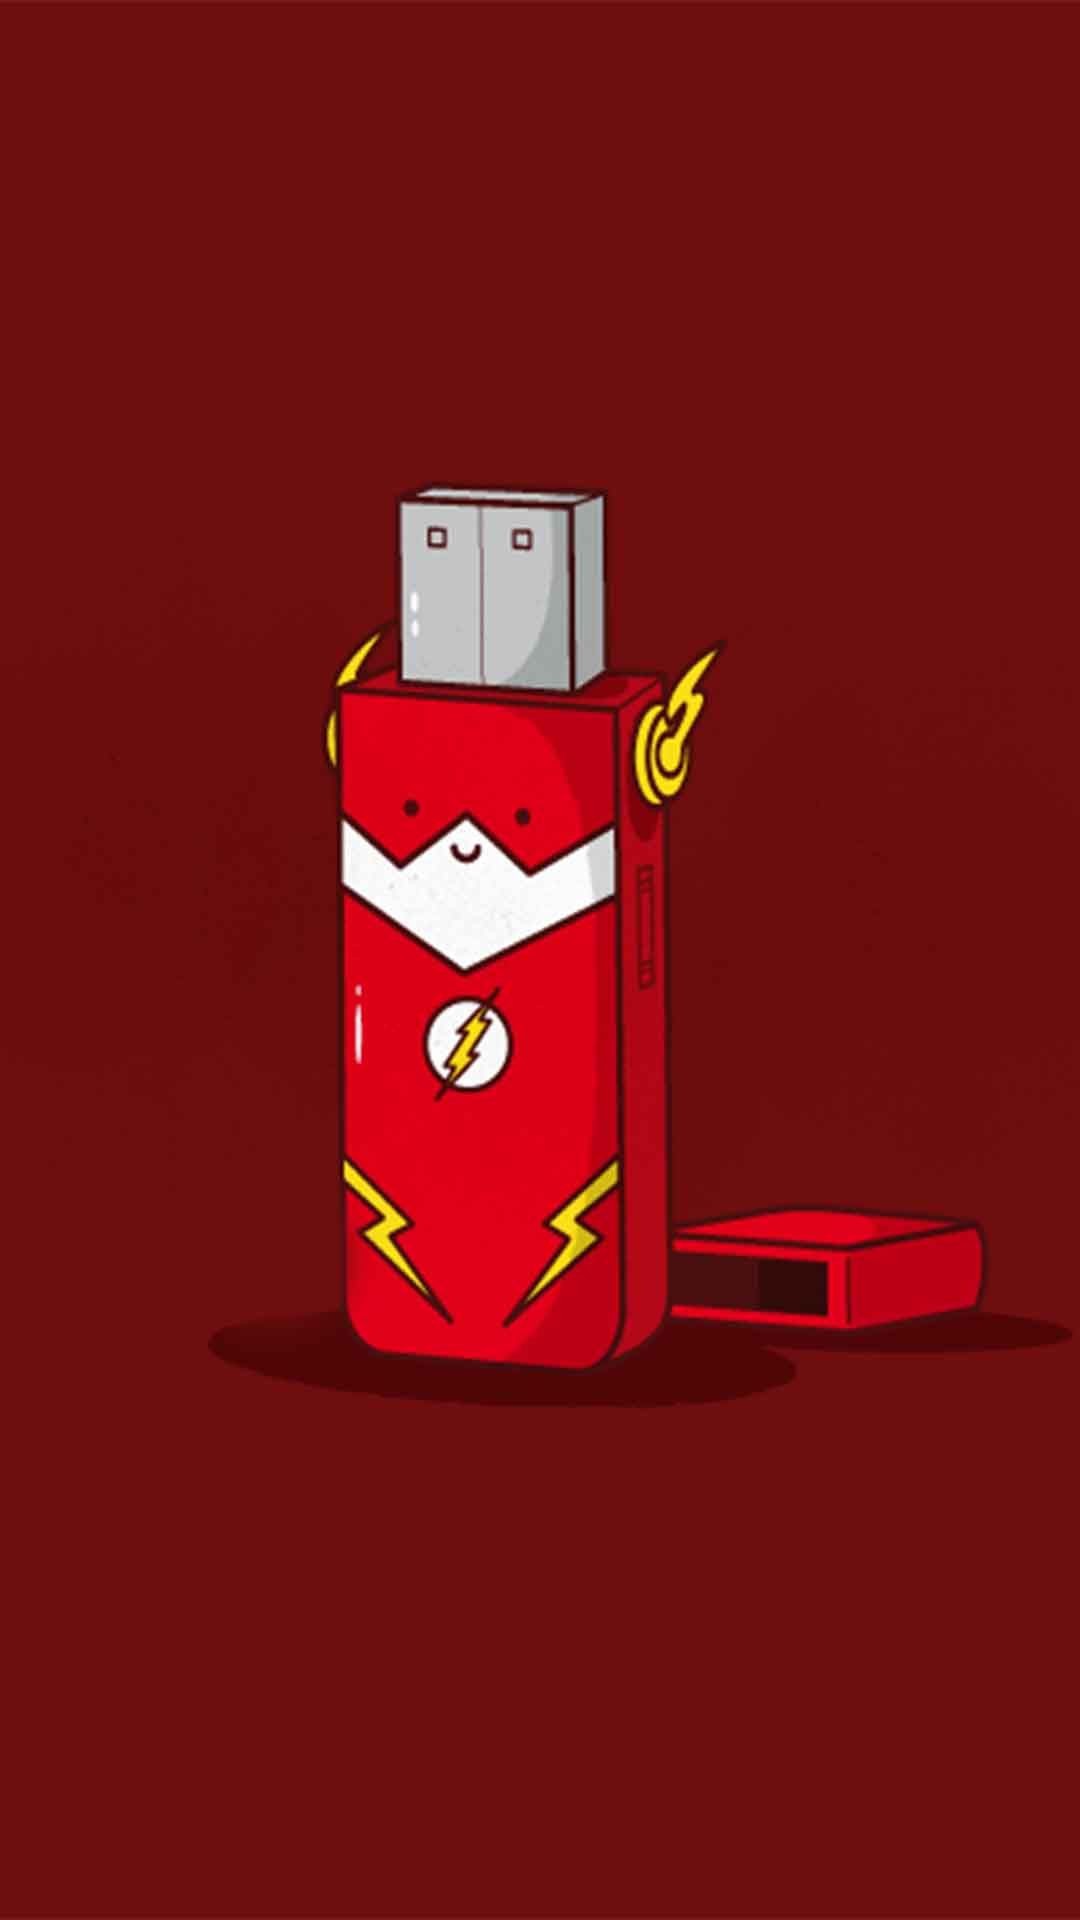 the flash iphone wallpaper,red,technology,illustration,electronic device,fictional character